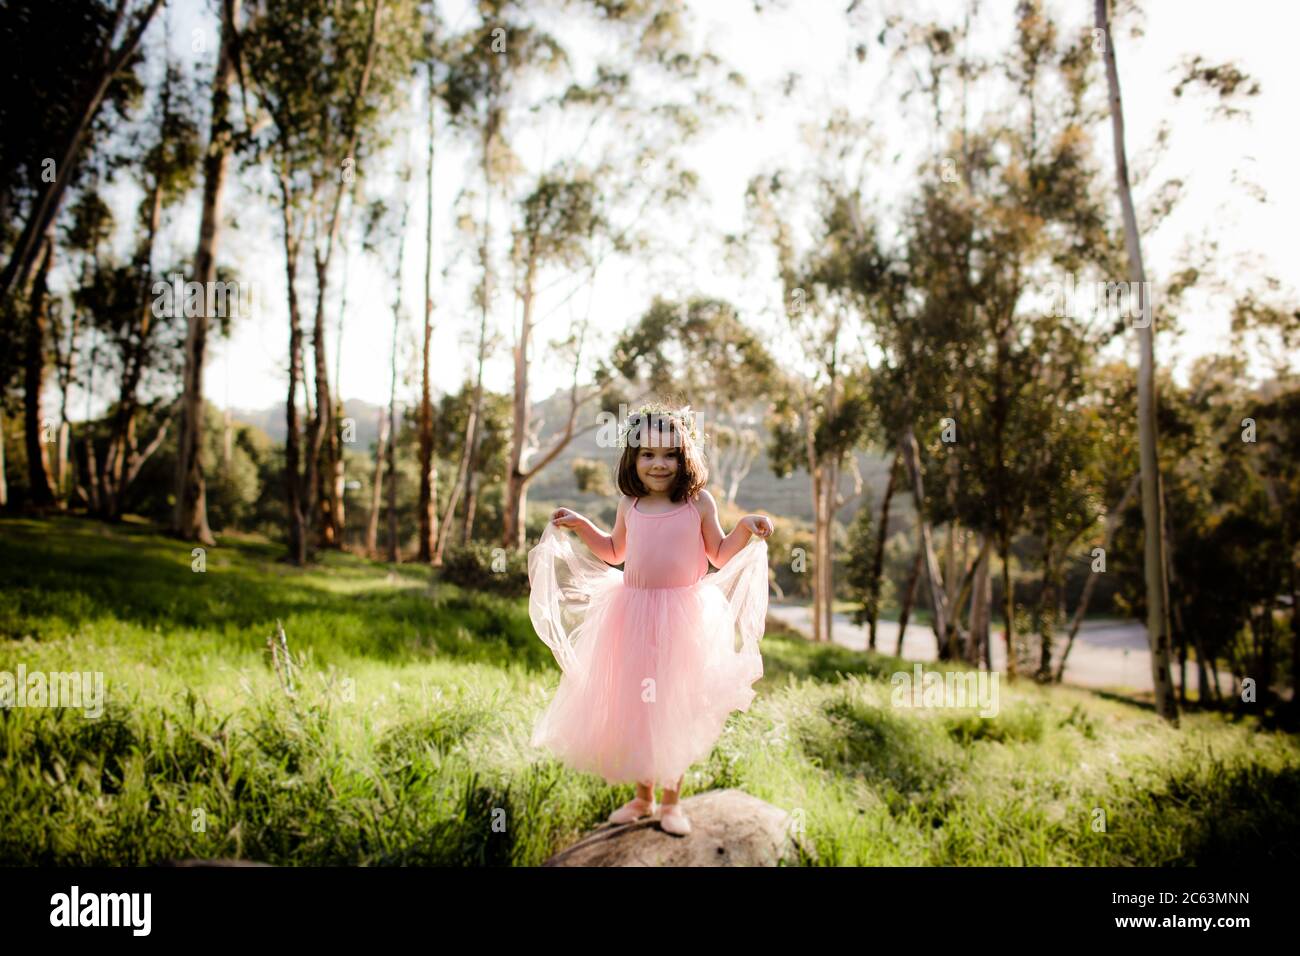 Young girl in tutu and flower crown posing in field Stock Photo